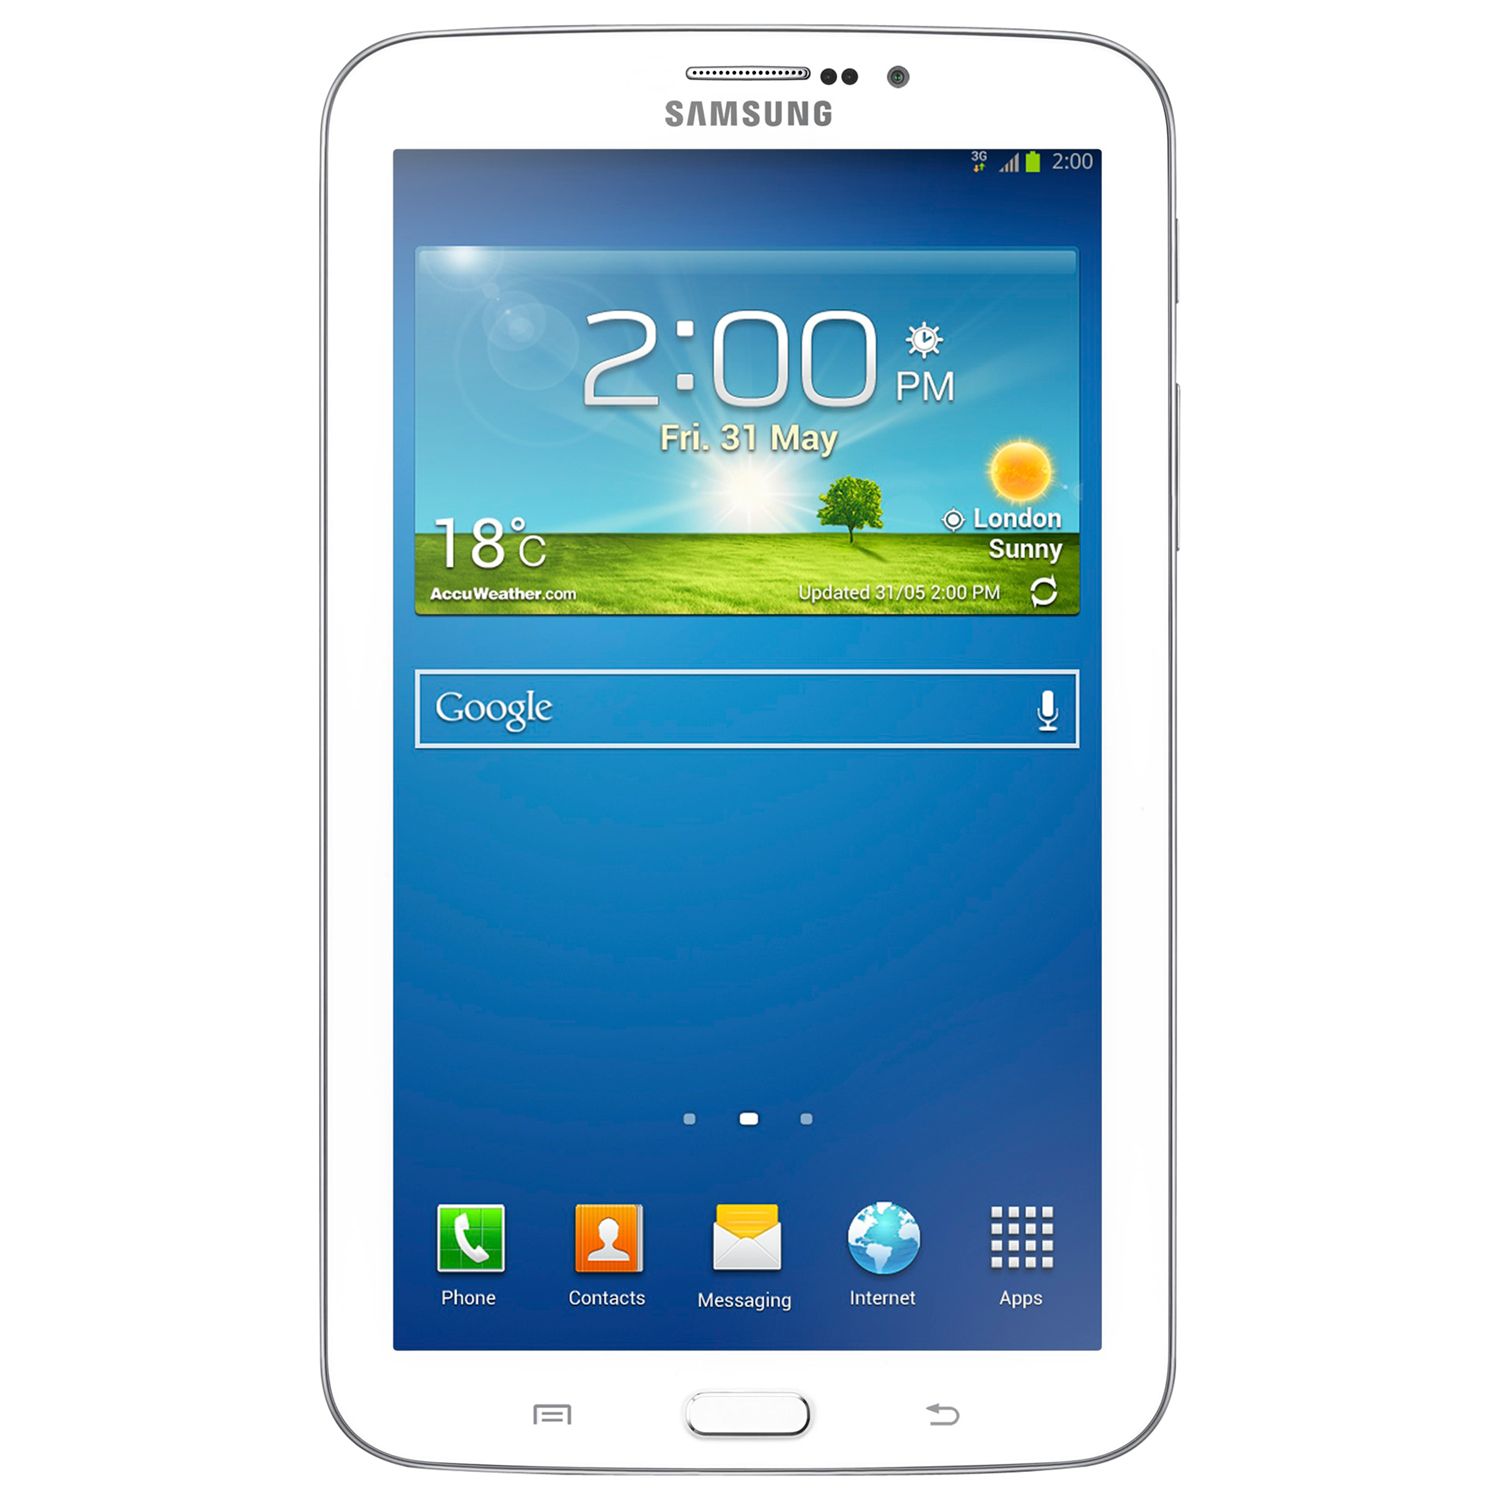 Samsung Galaxy Tab 3 70 Tablet, Marvell PXA, Android, 7", Wi-Fi & 3G, 8GB, White